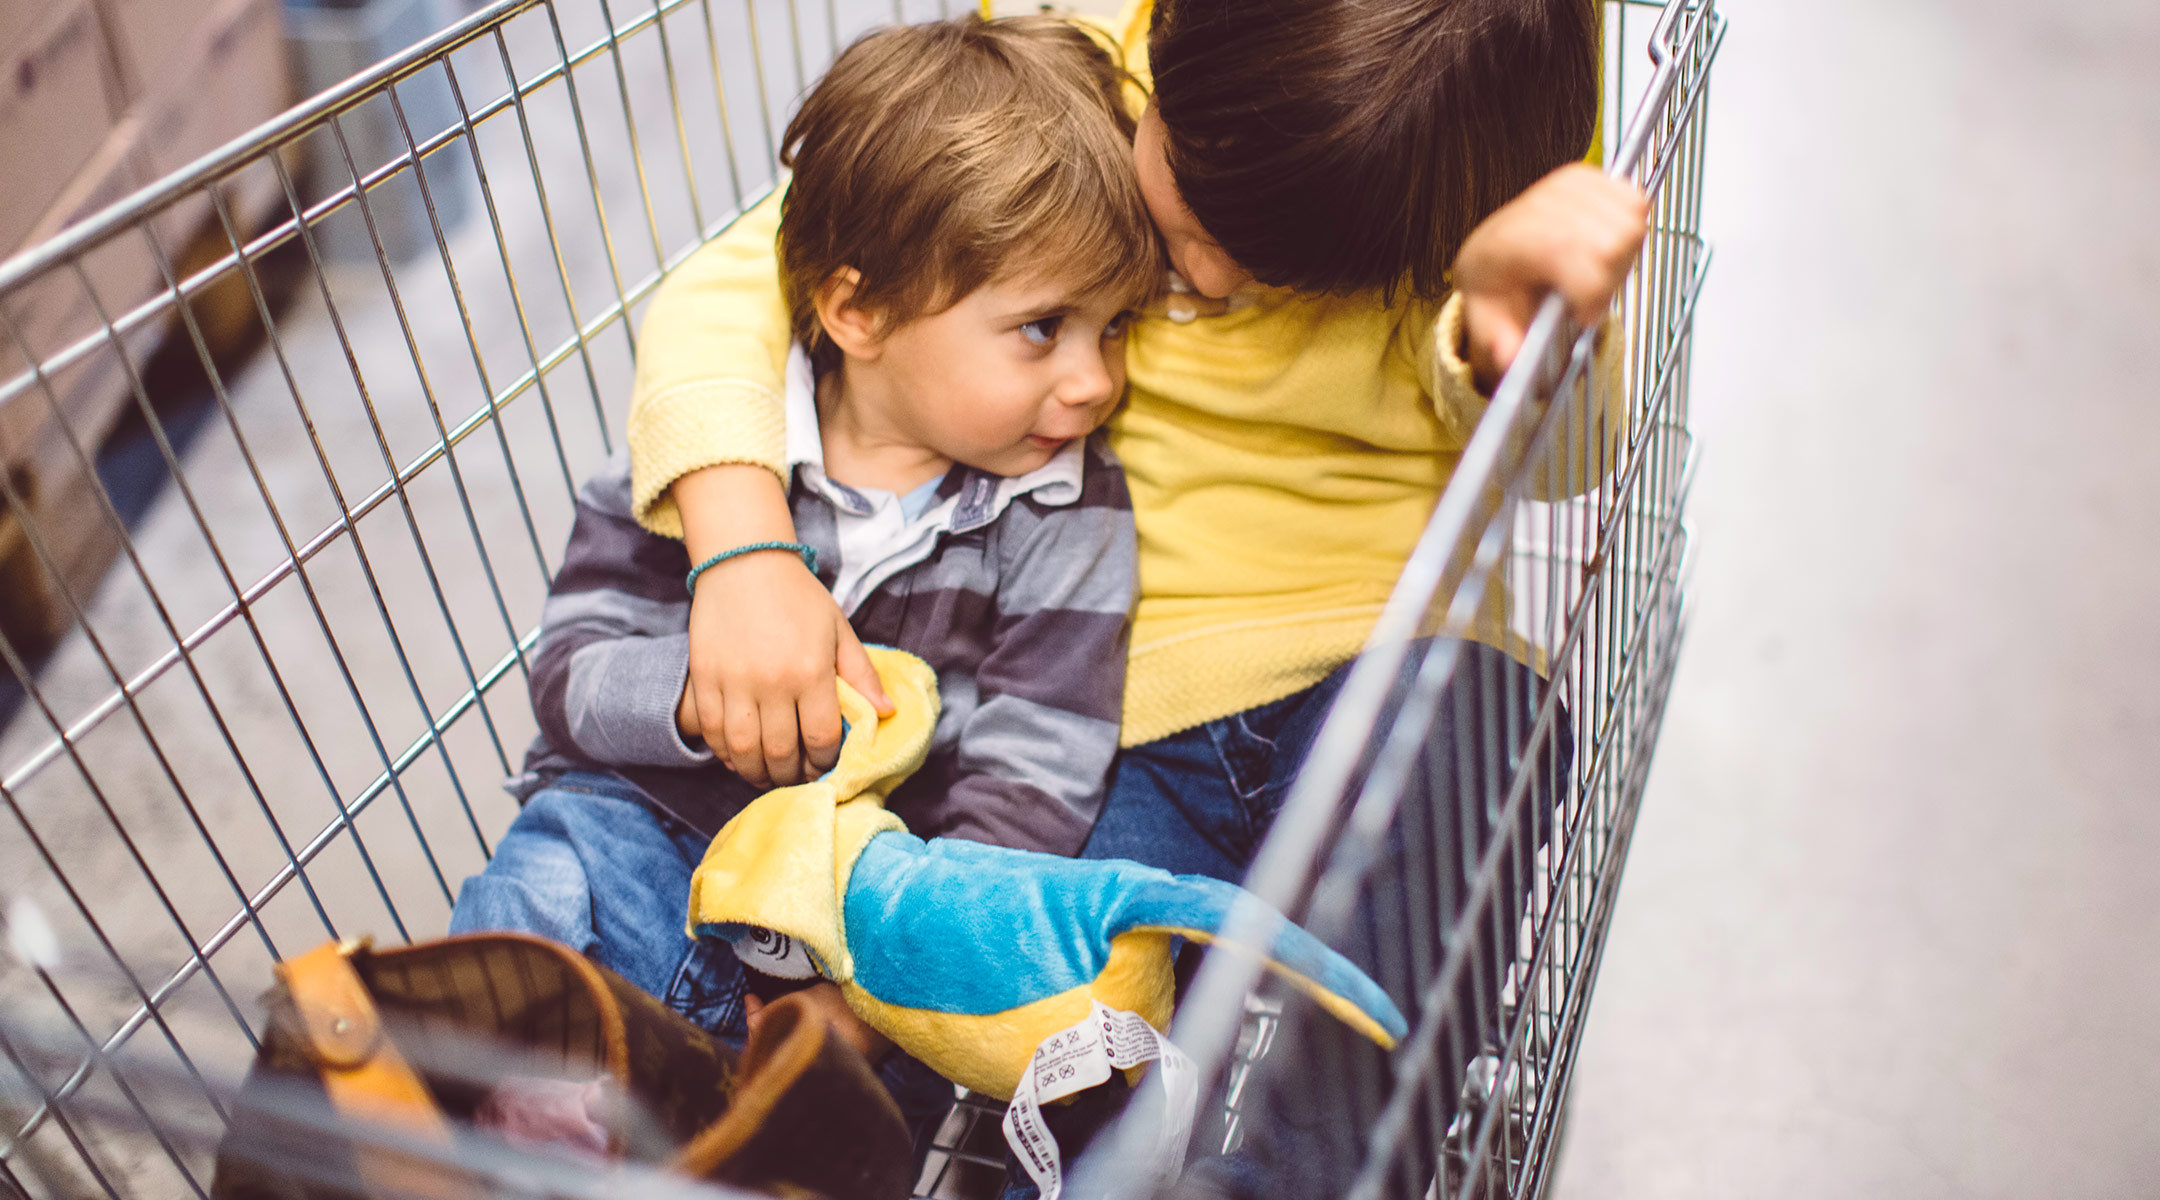 two young boys in shopping cart at big box store